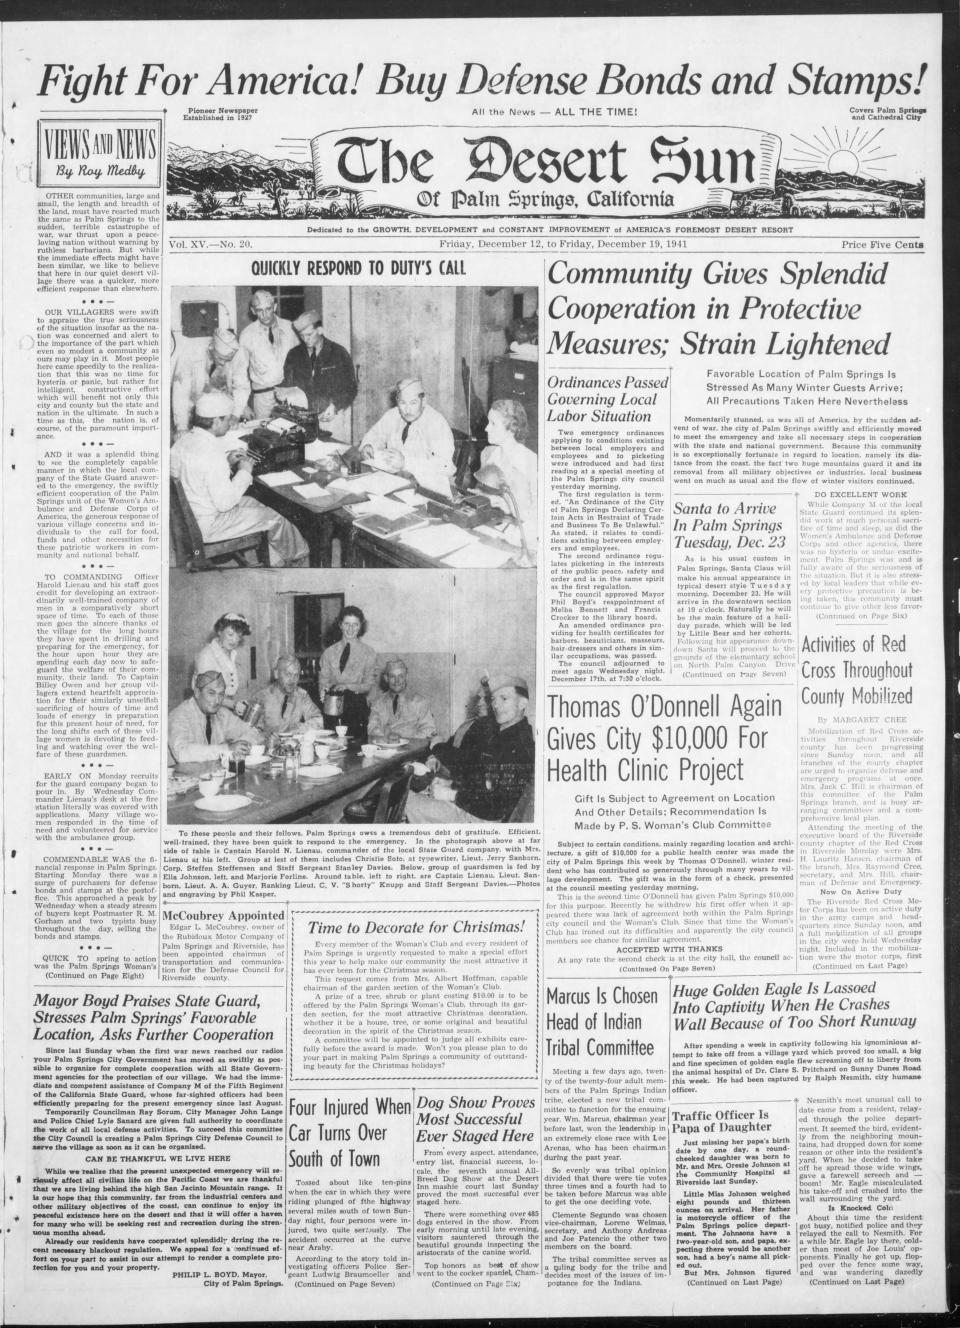 Front page of the Dec. 12 - Dec. 19, 1941 Desert Sun reporting on the Pearl Harbor attack.